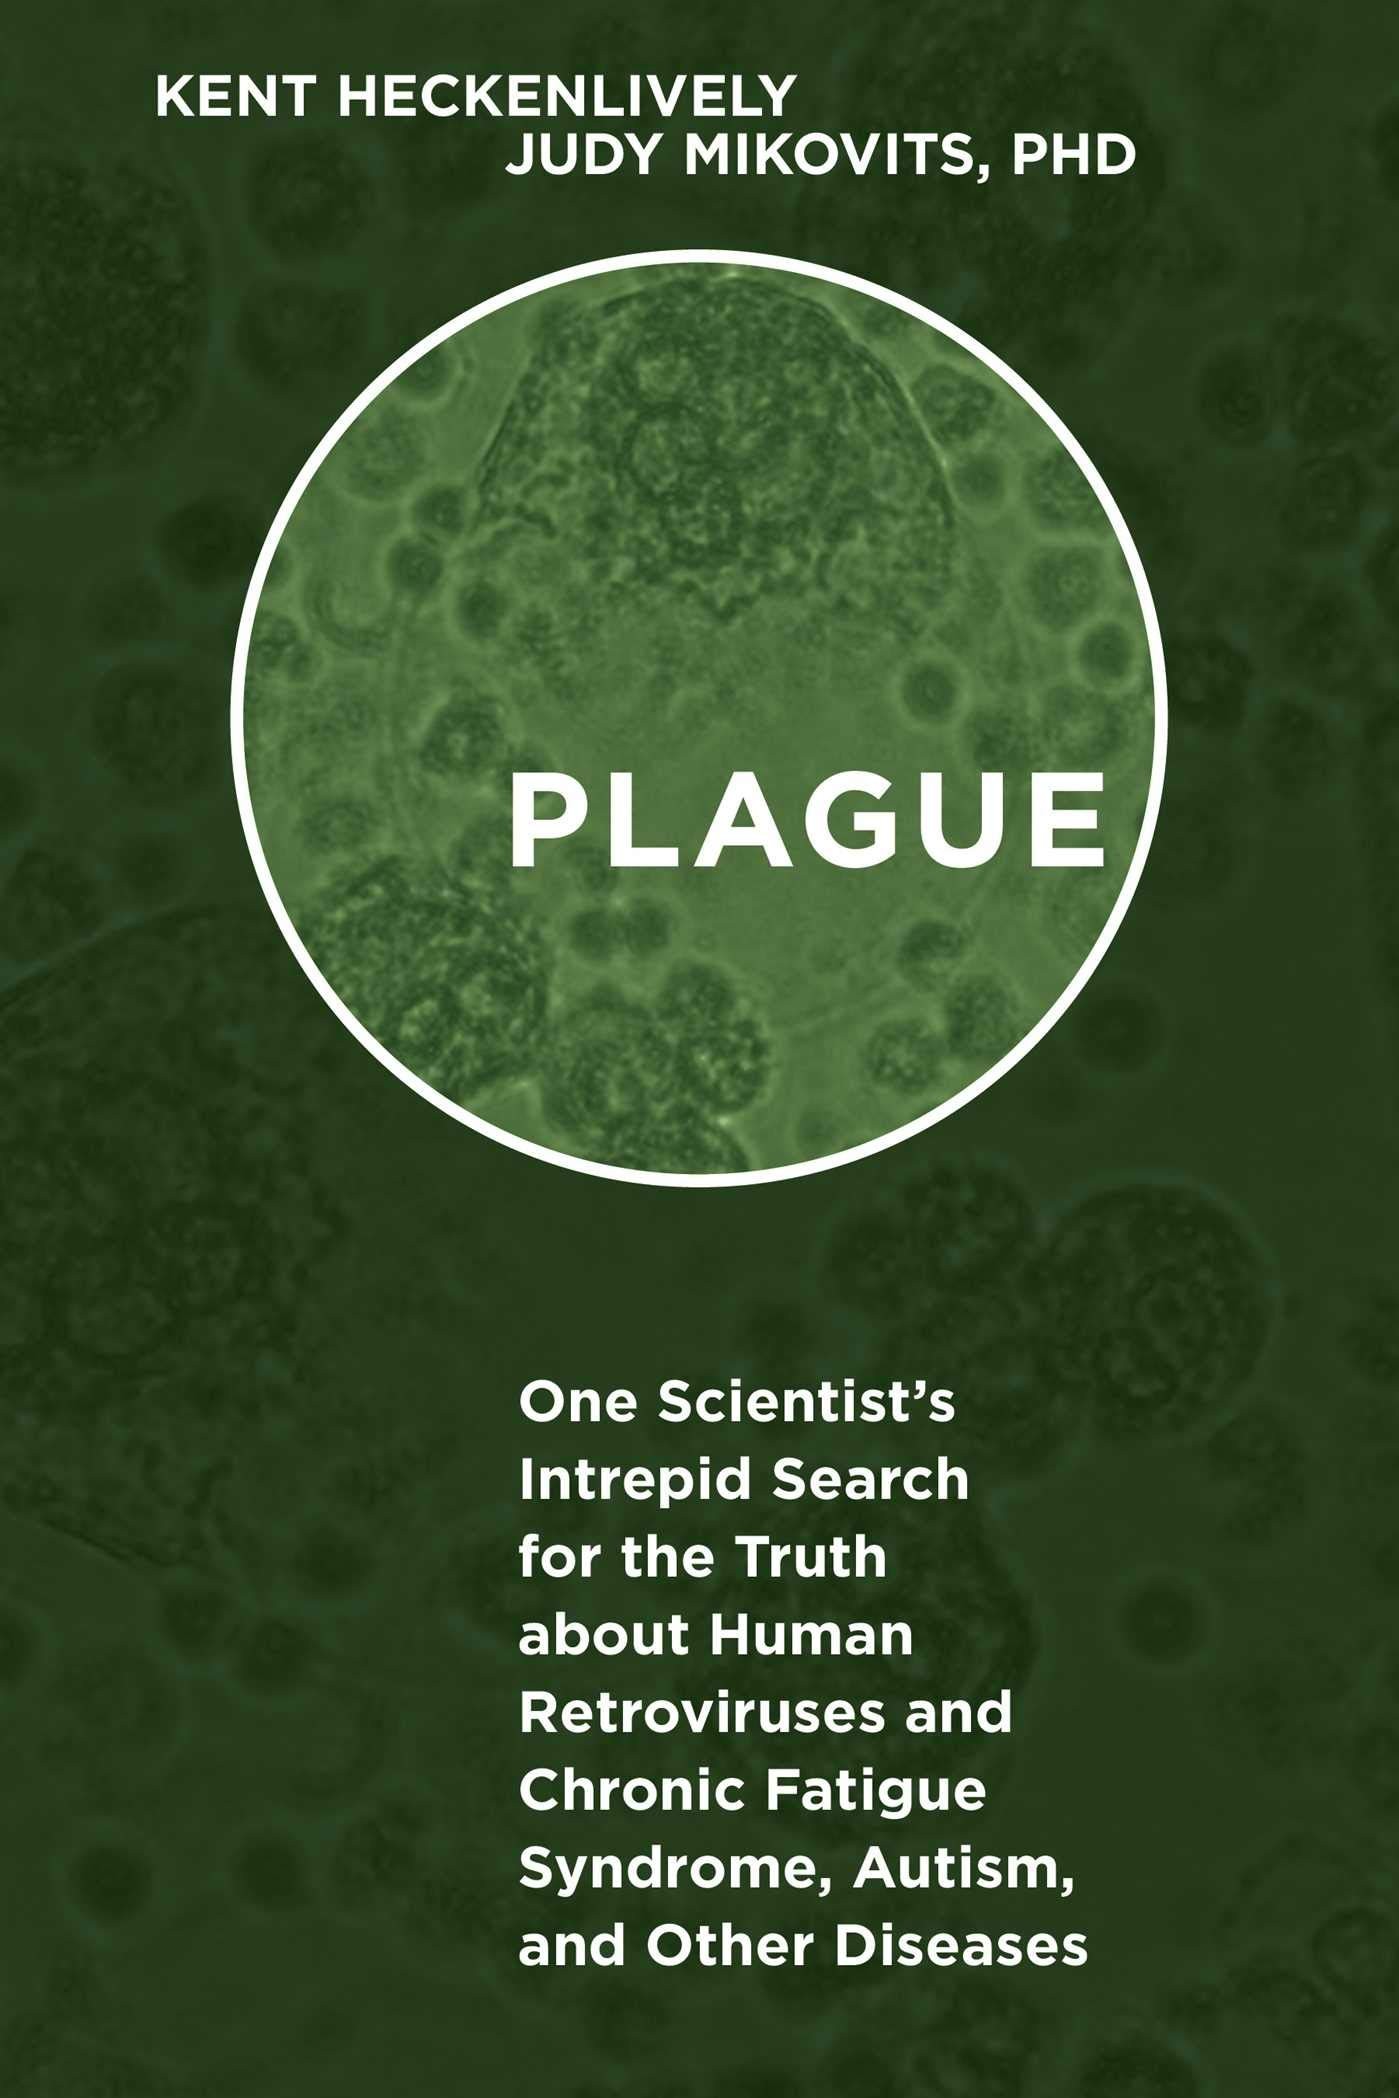 Plague: One Scientist's Intrepid Search for the Truth About Human Retroviruses and Chronic Fatigue Syndrome , Autism, and Other Diseases